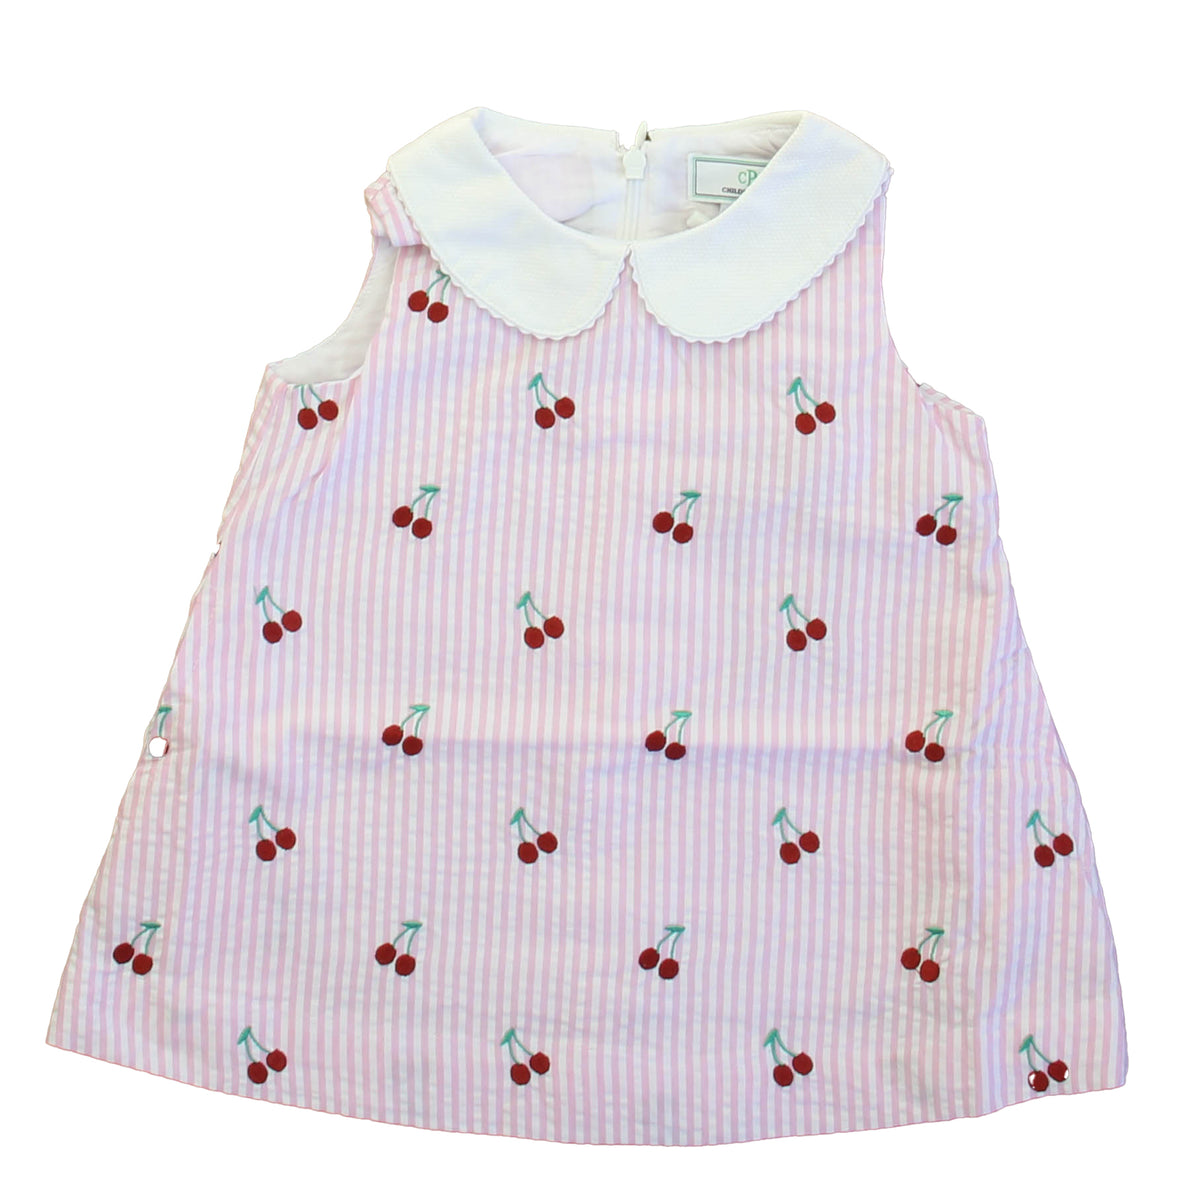 New with Tags: Cherries on Pink Stripe Dress -- FINAL SALE